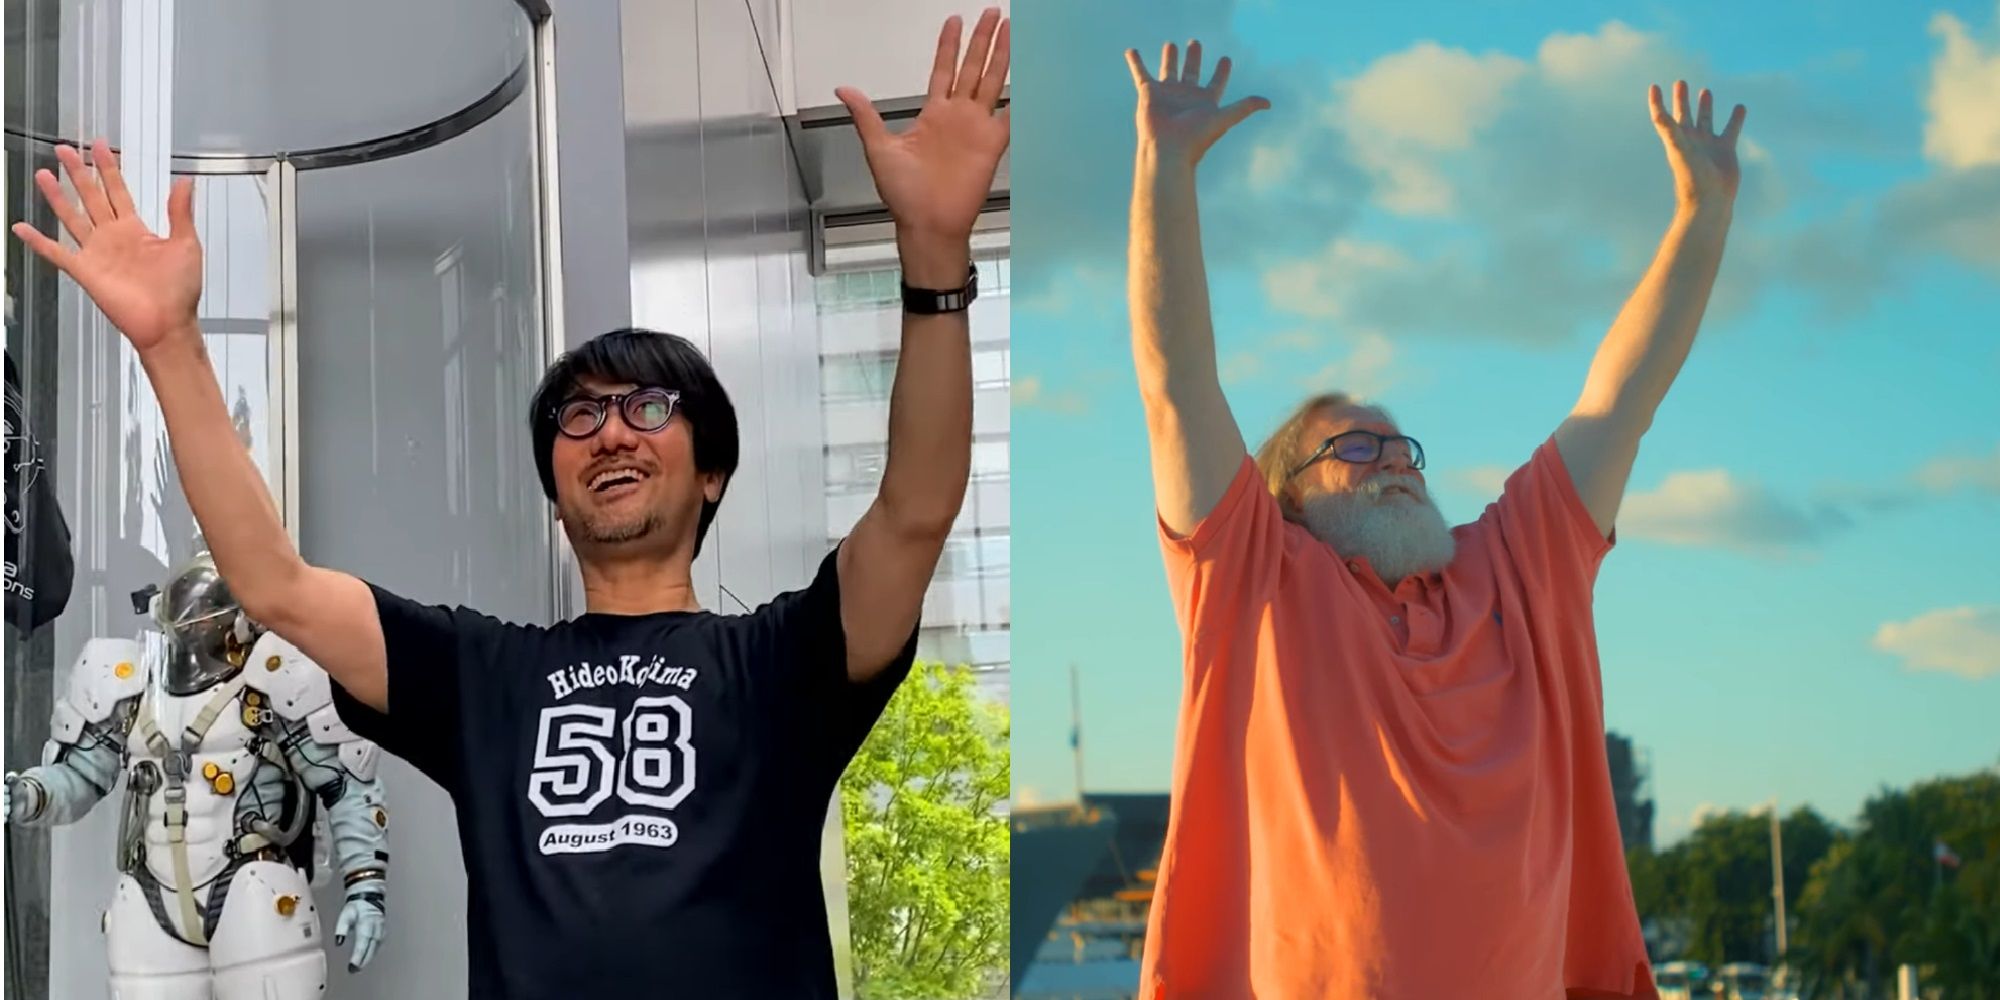 Hideo Kojima, Gabe Newell And Other Superstar Developers Star In